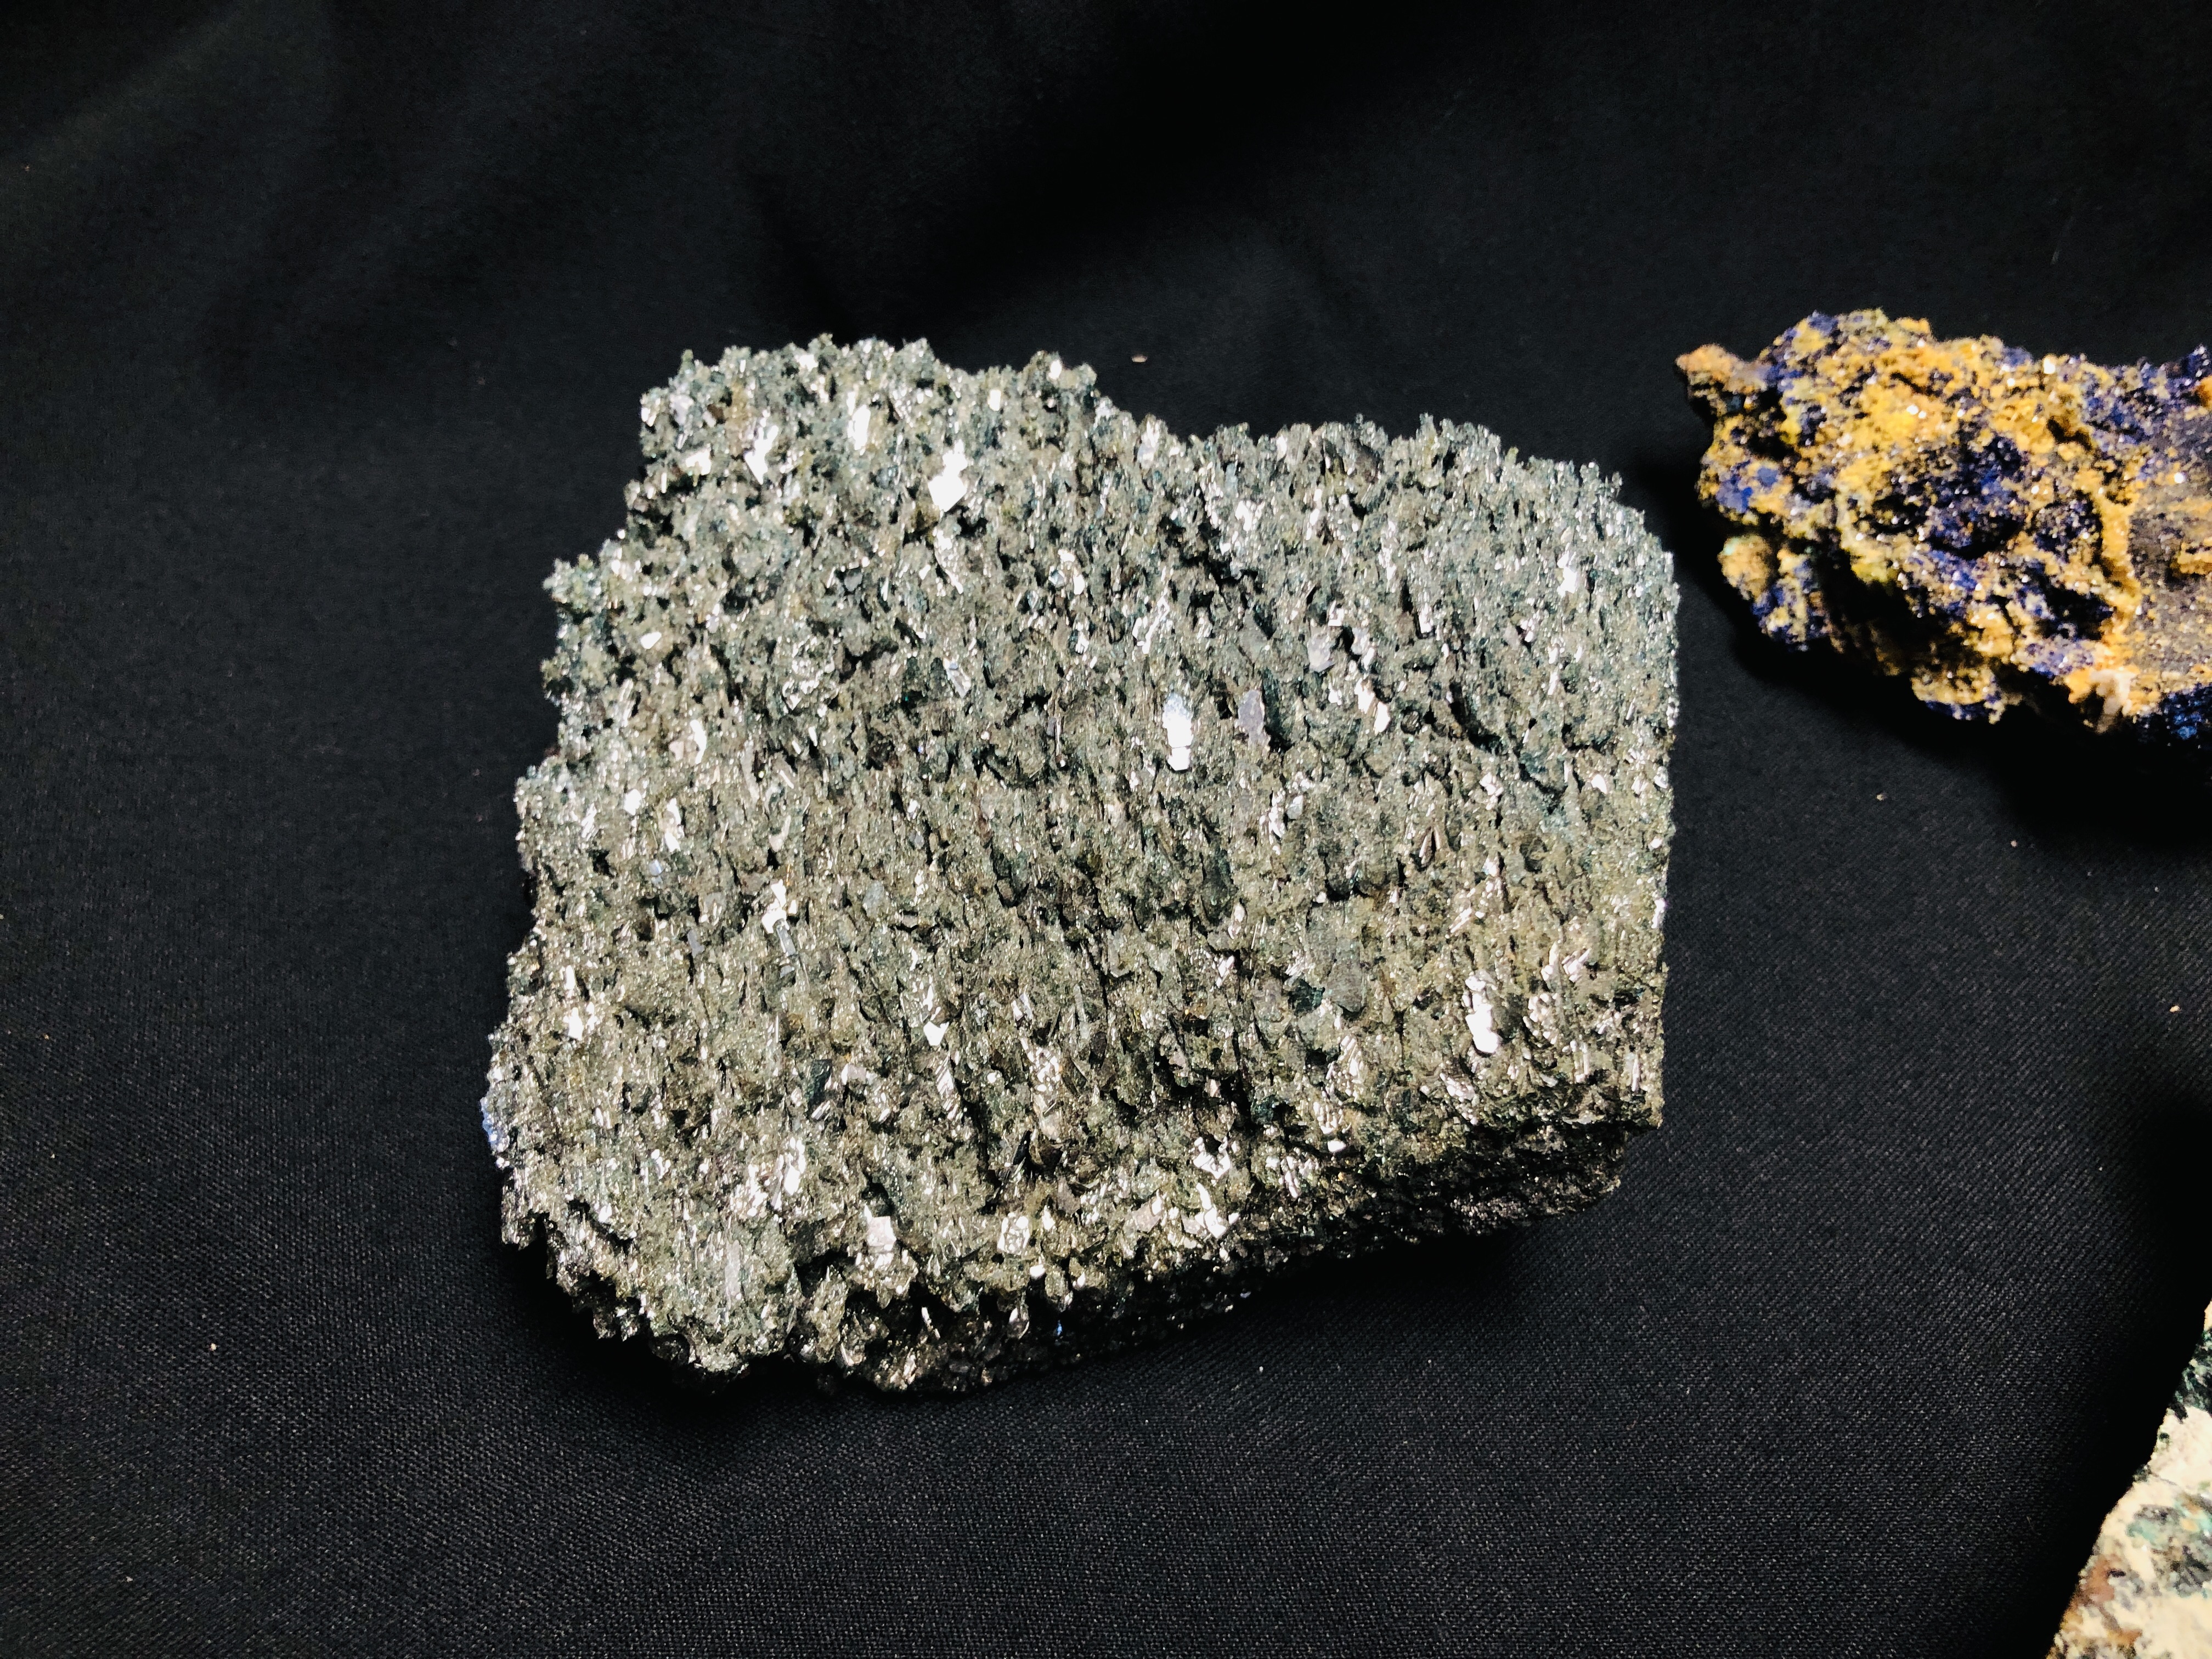 A COLLECTION OF APPROX 5 CRYSTAL AND MINERAL ROCK EXAMPLES. - Image 6 of 6